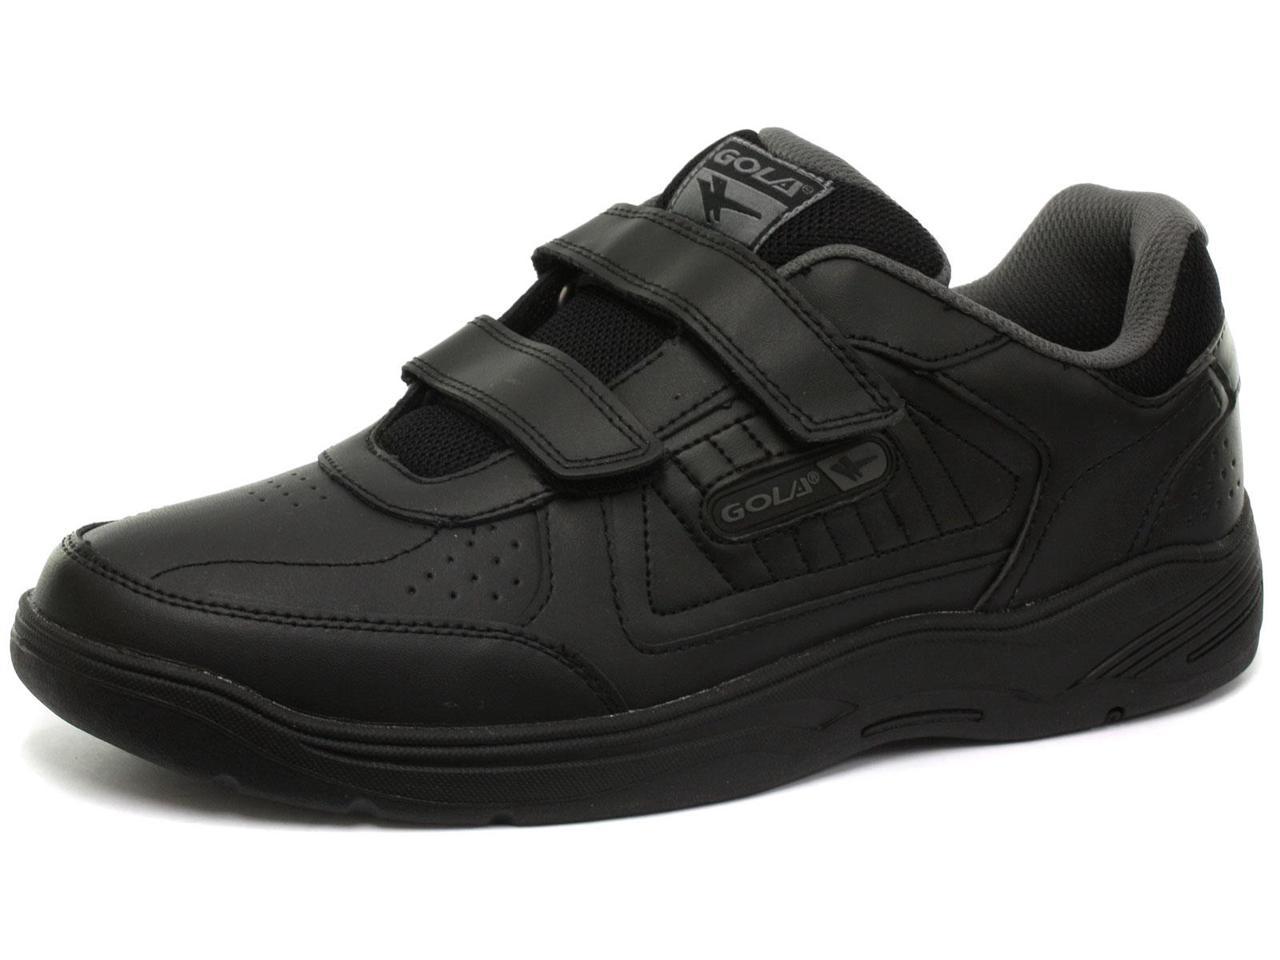 mens trainers wide fit uk